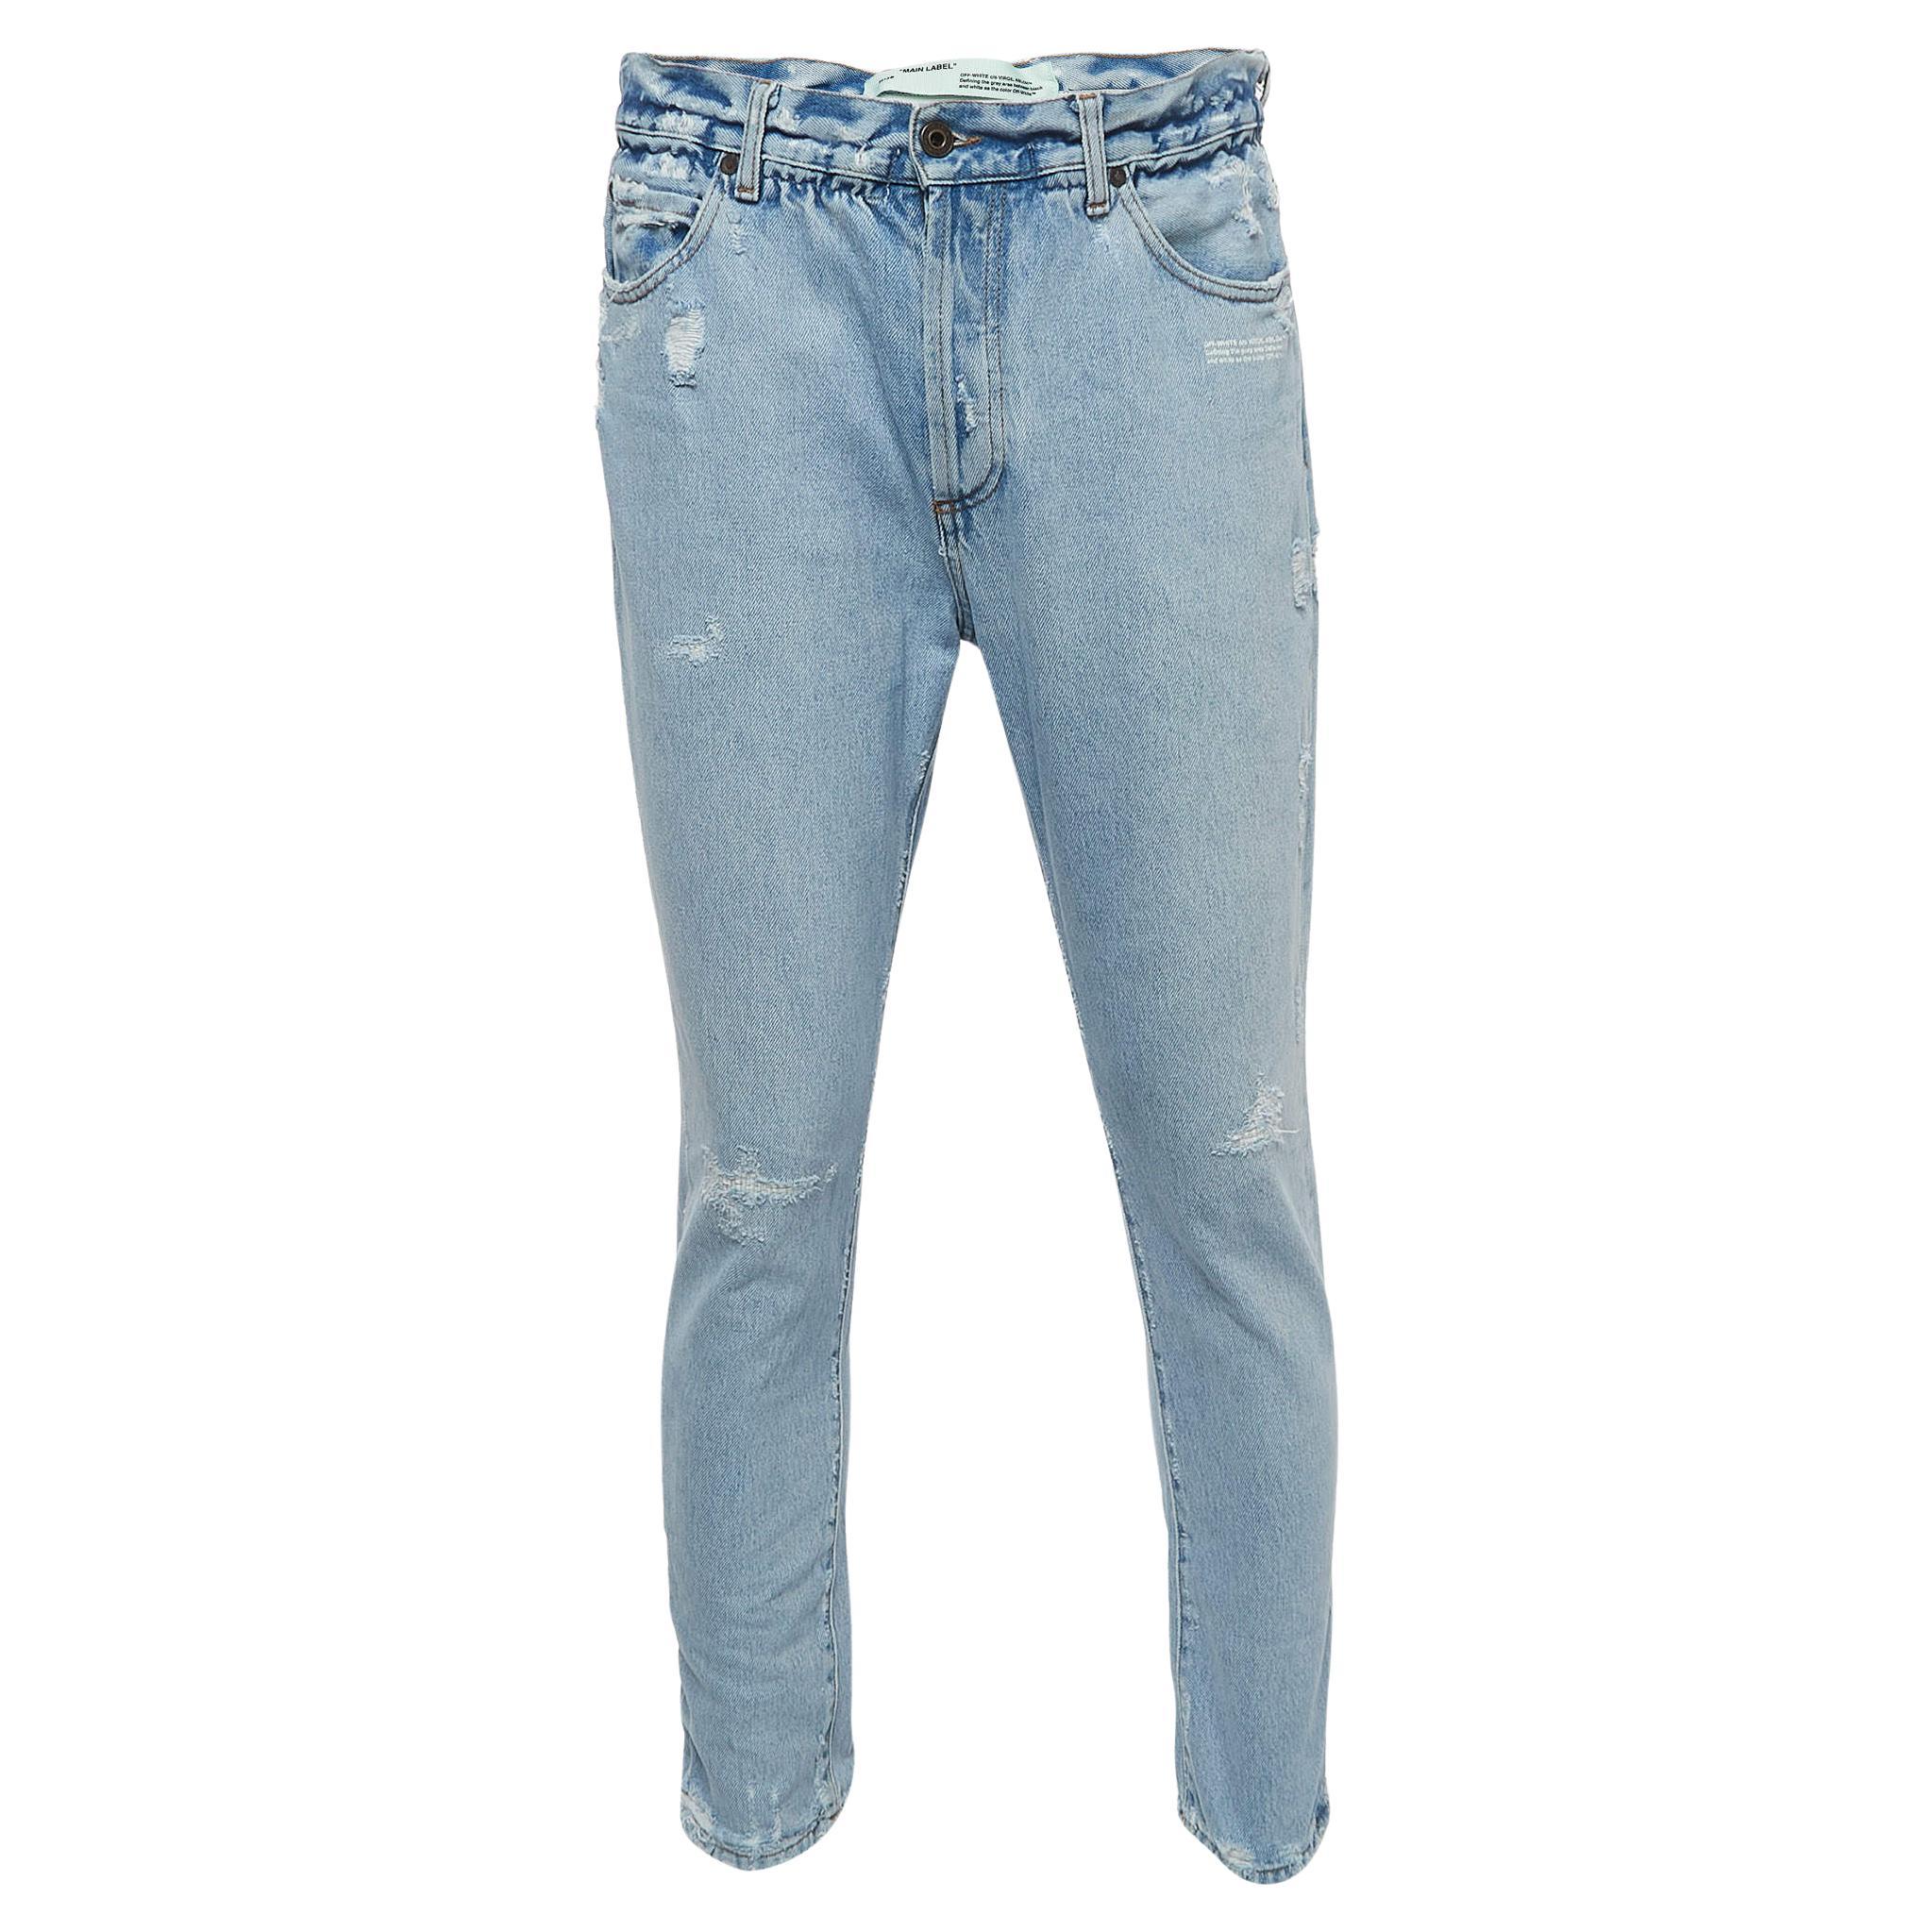 Off-White Light Blue Distressed Denim Buttoned Paperbag Waist Jeans M Waist 30" For Sale